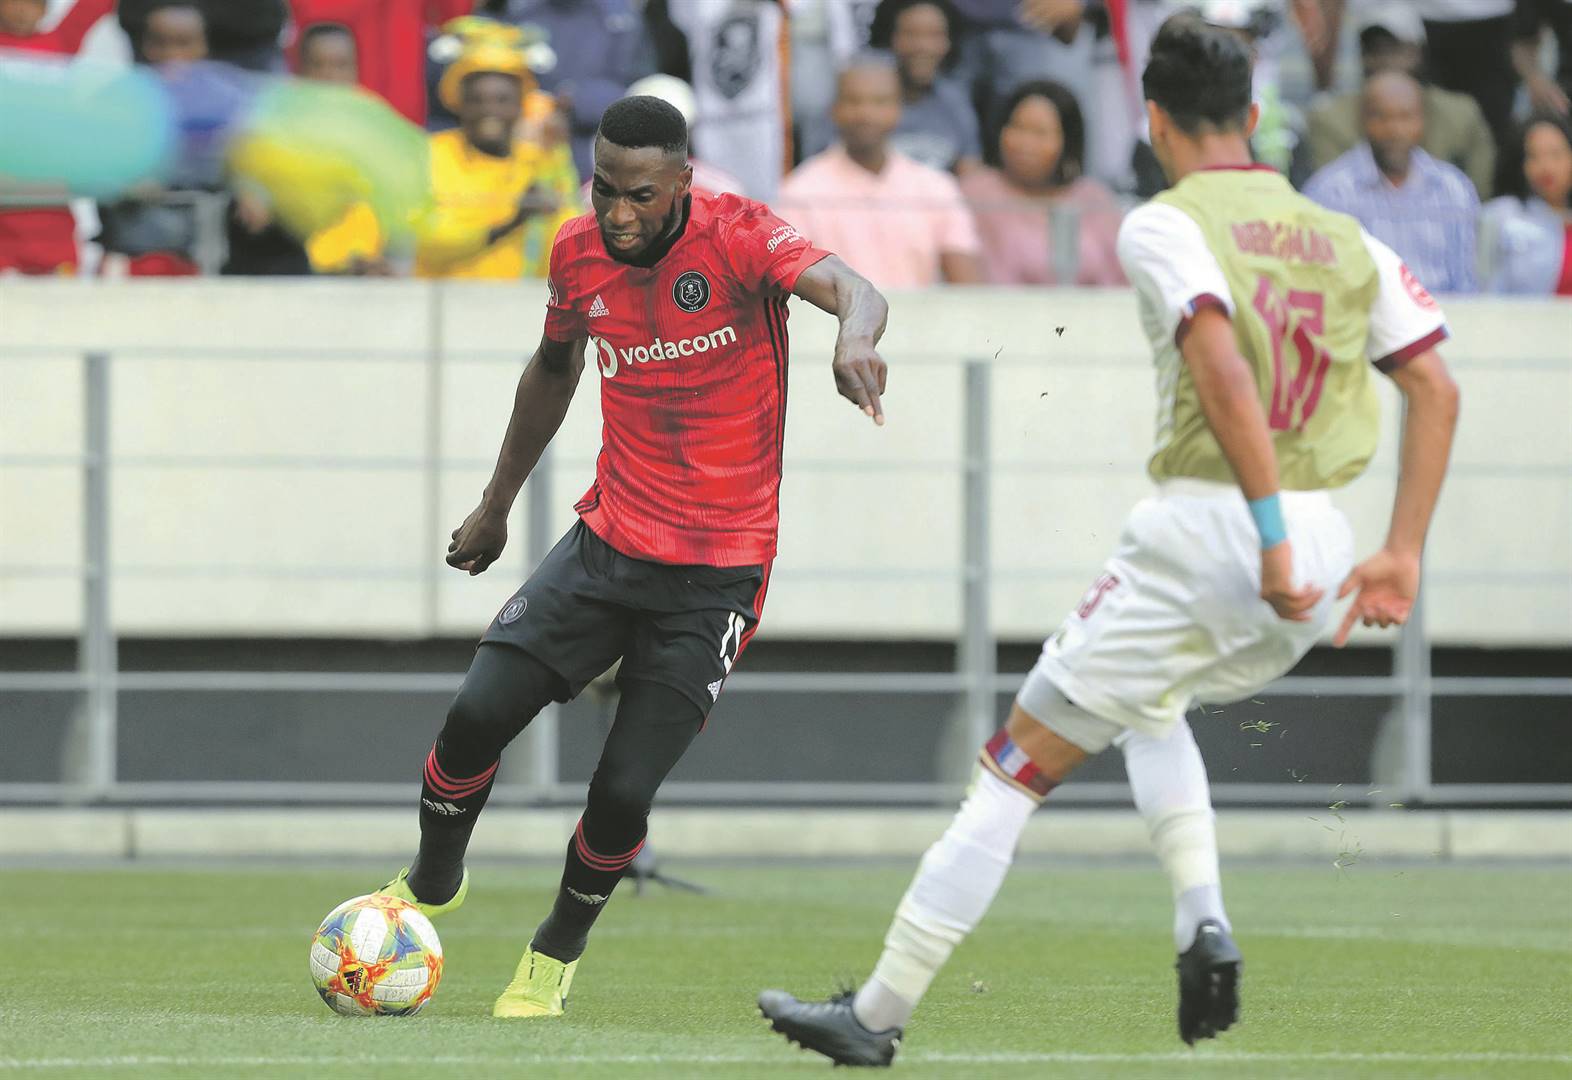 Orlando Pirates midfielder Fortune Makaringe drives the ball past a Stellenbosch FC player during their Absa Premiership match at Cape Town Stadium. Picture: Carl Fourie/Gallo Images